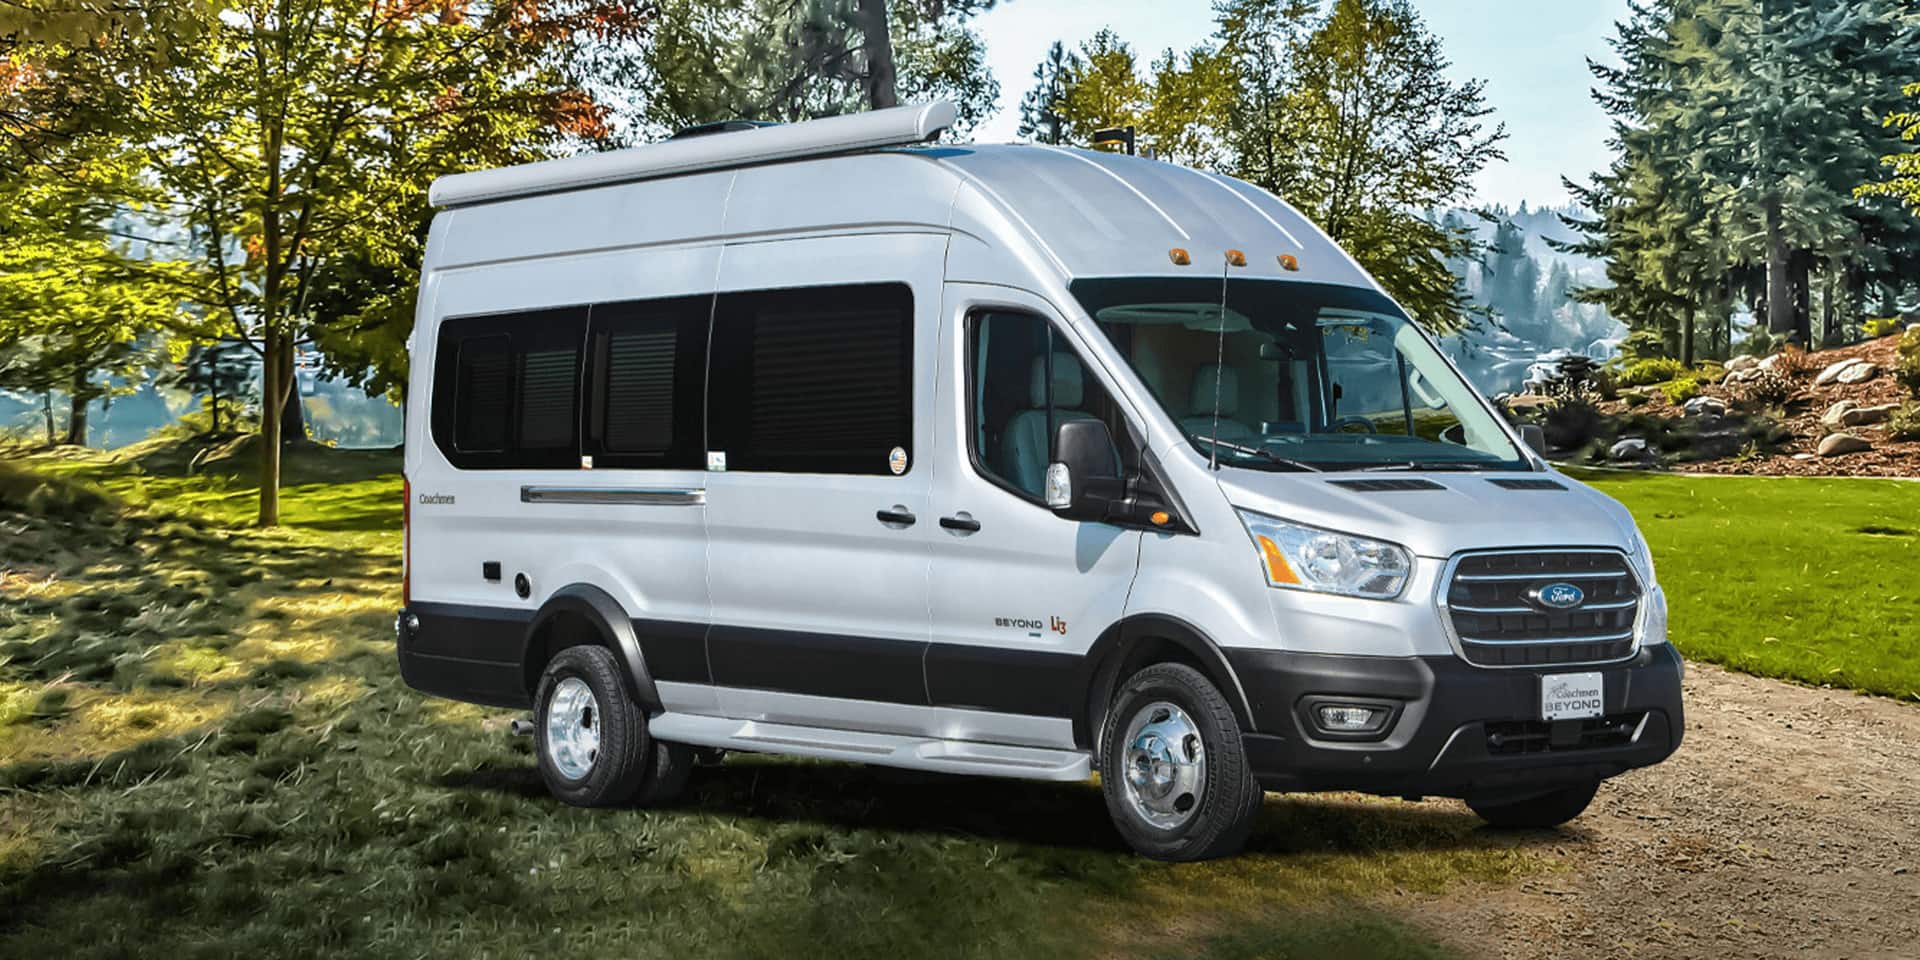 A silver Transit is parked on a dirt road.